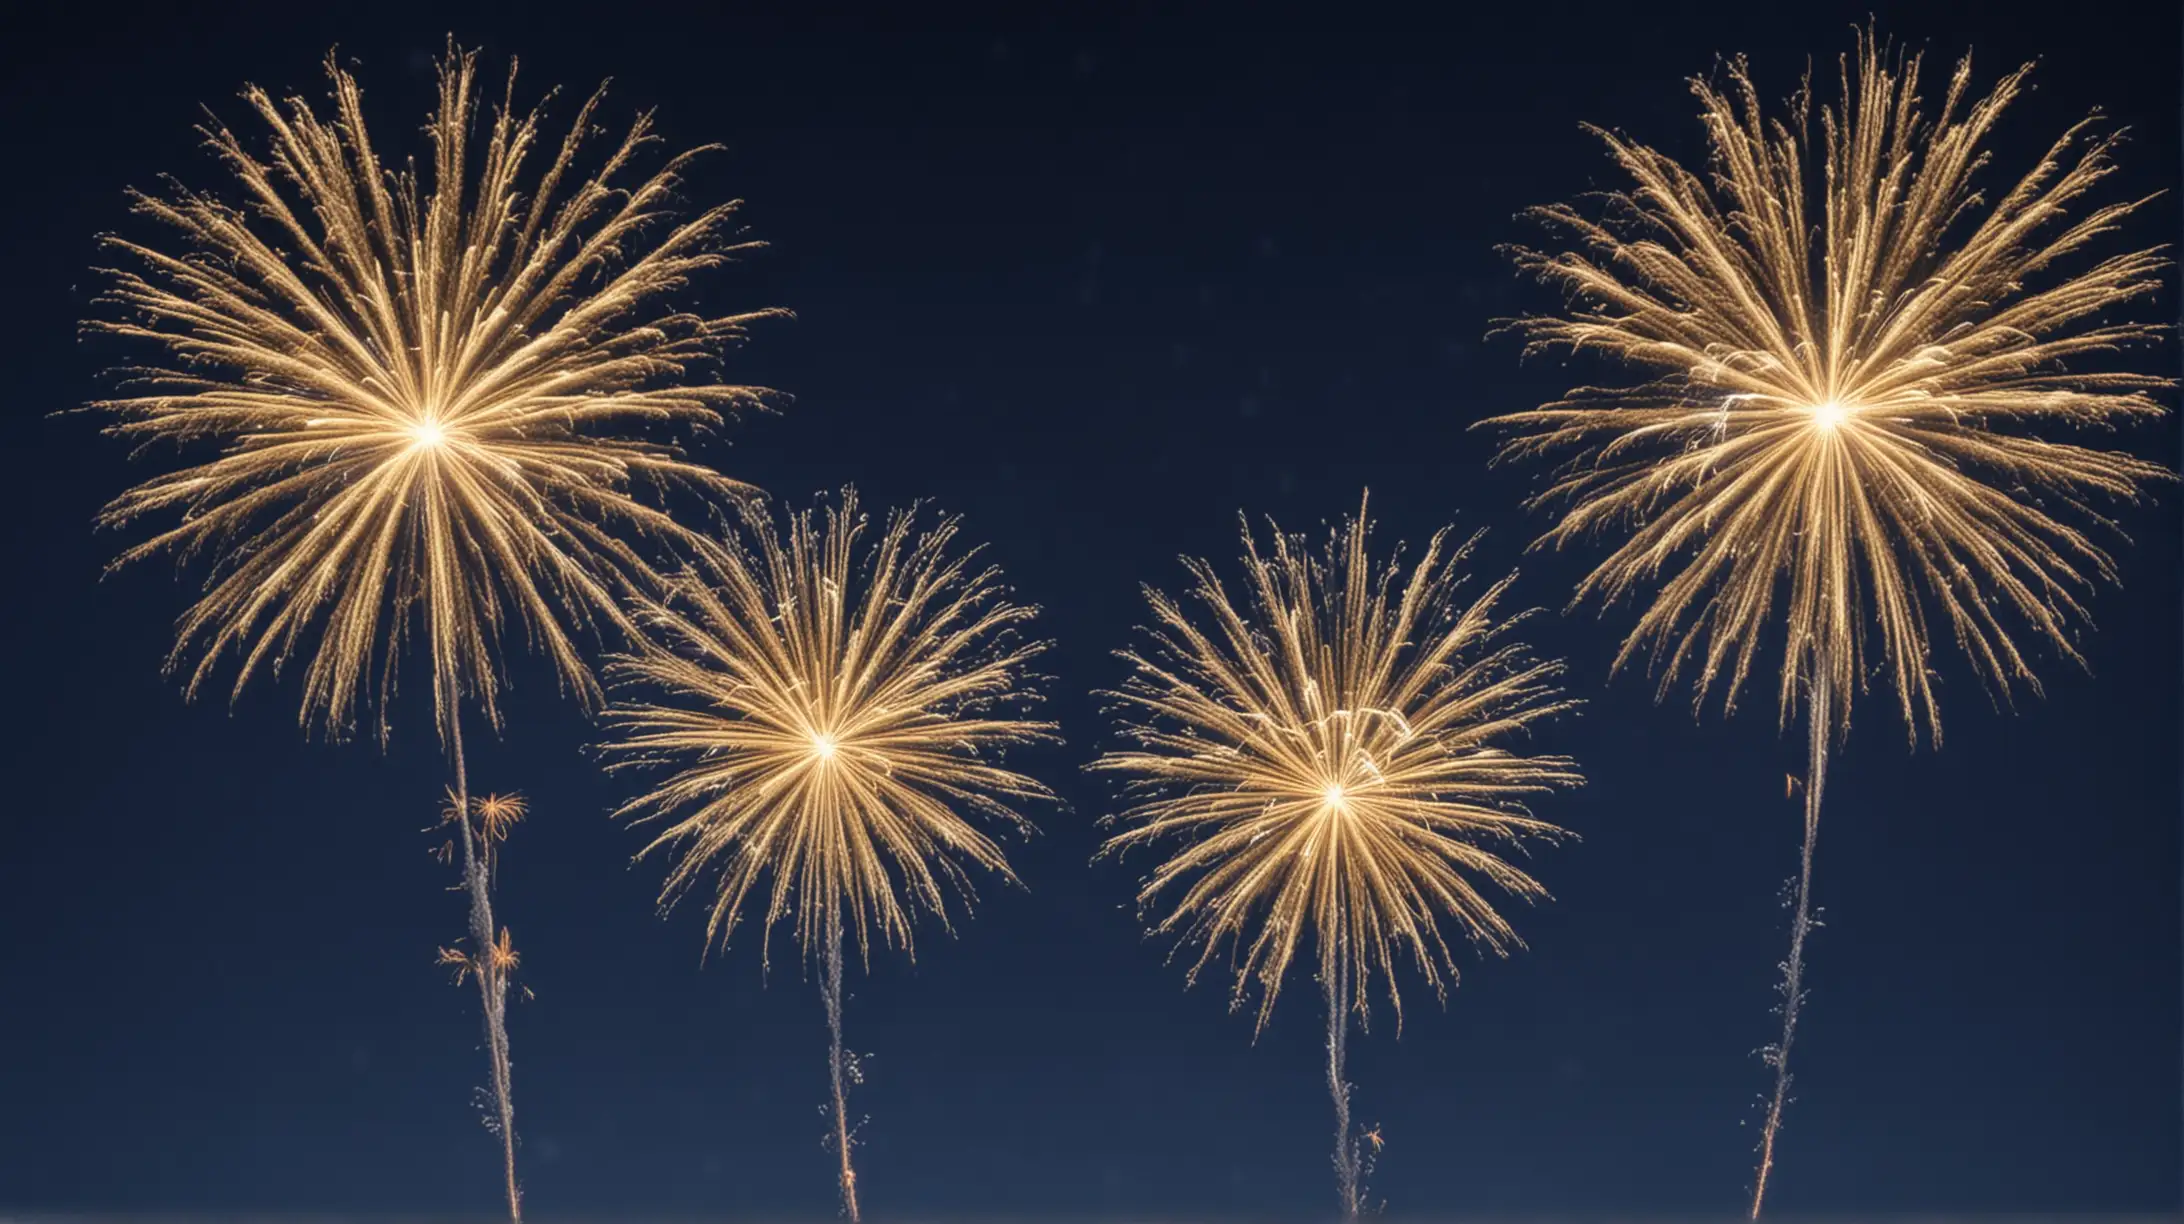 Vibrant Silver and Gold Fireworks Lighting Up the Night Sky